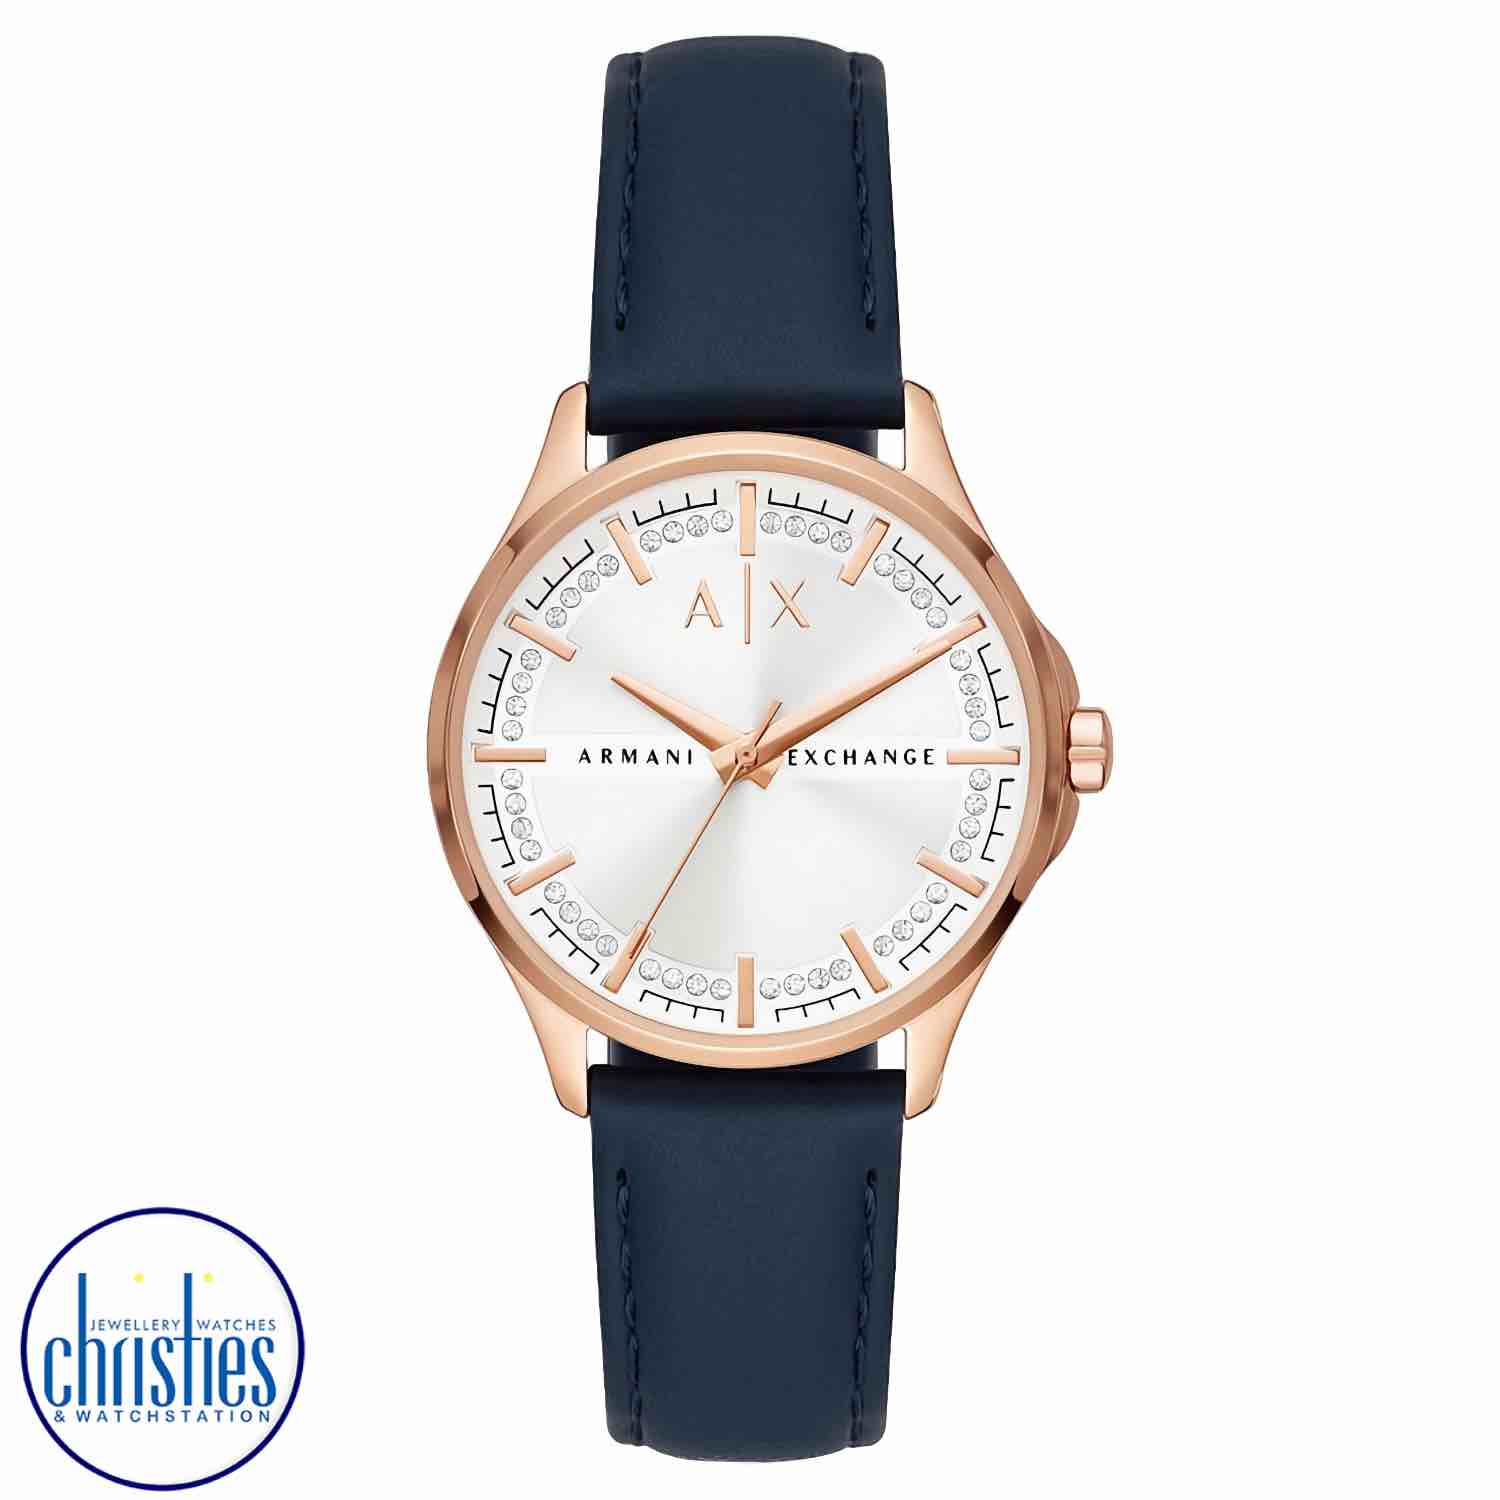 AX5260 A|X Armani Exchange Three-Hand Blue Leather Watch. AX5258 A|X Armani Exchange Three-Hand Blue Leather WatchAfterpay - Split your purchase into 4 instalments - Pay for your purchase over 4 instalments, due every two weeks.